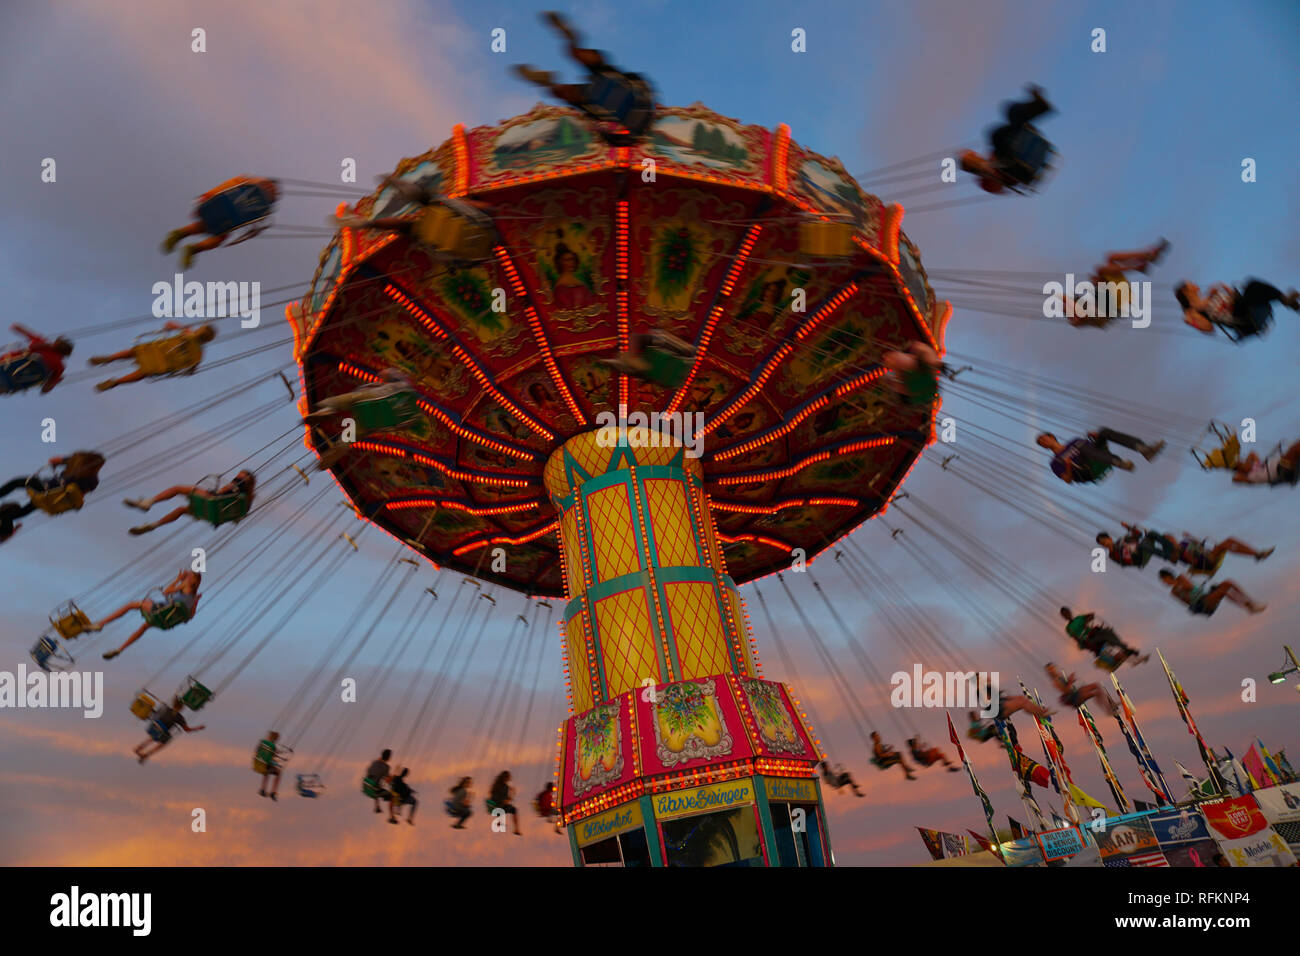 Giant Swing Ride High Resolution Stock Photography and Images - Alamy